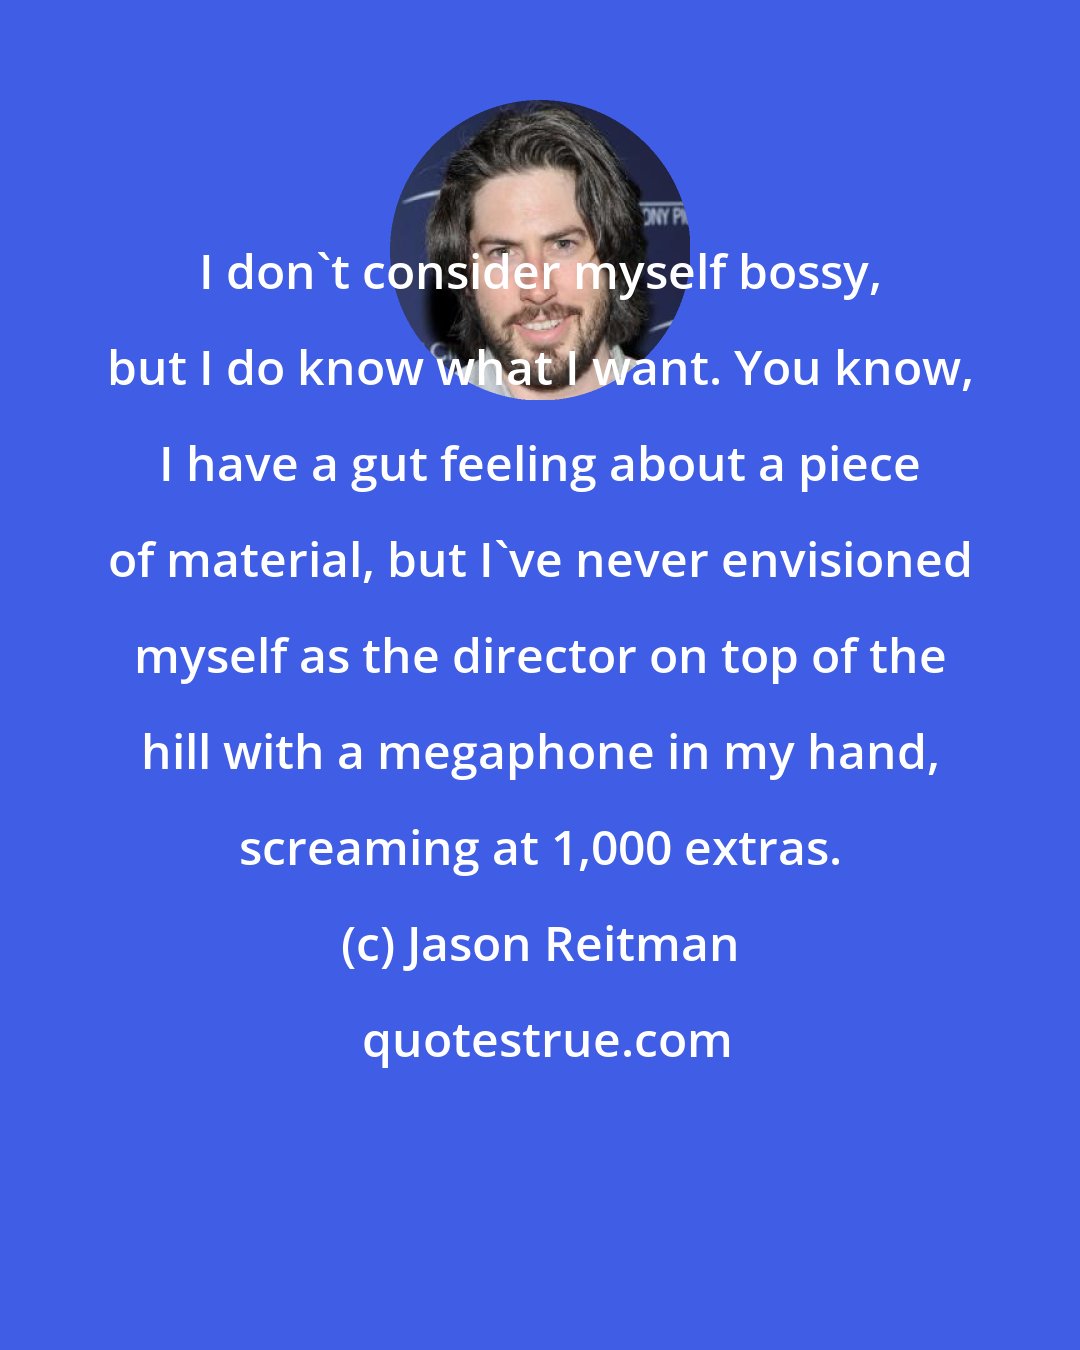 Jason Reitman: I don't consider myself bossy, but I do know what I want. You know, I have a gut feeling about a piece of material, but I've never envisioned myself as the director on top of the hill with a megaphone in my hand, screaming at 1,000 extras.